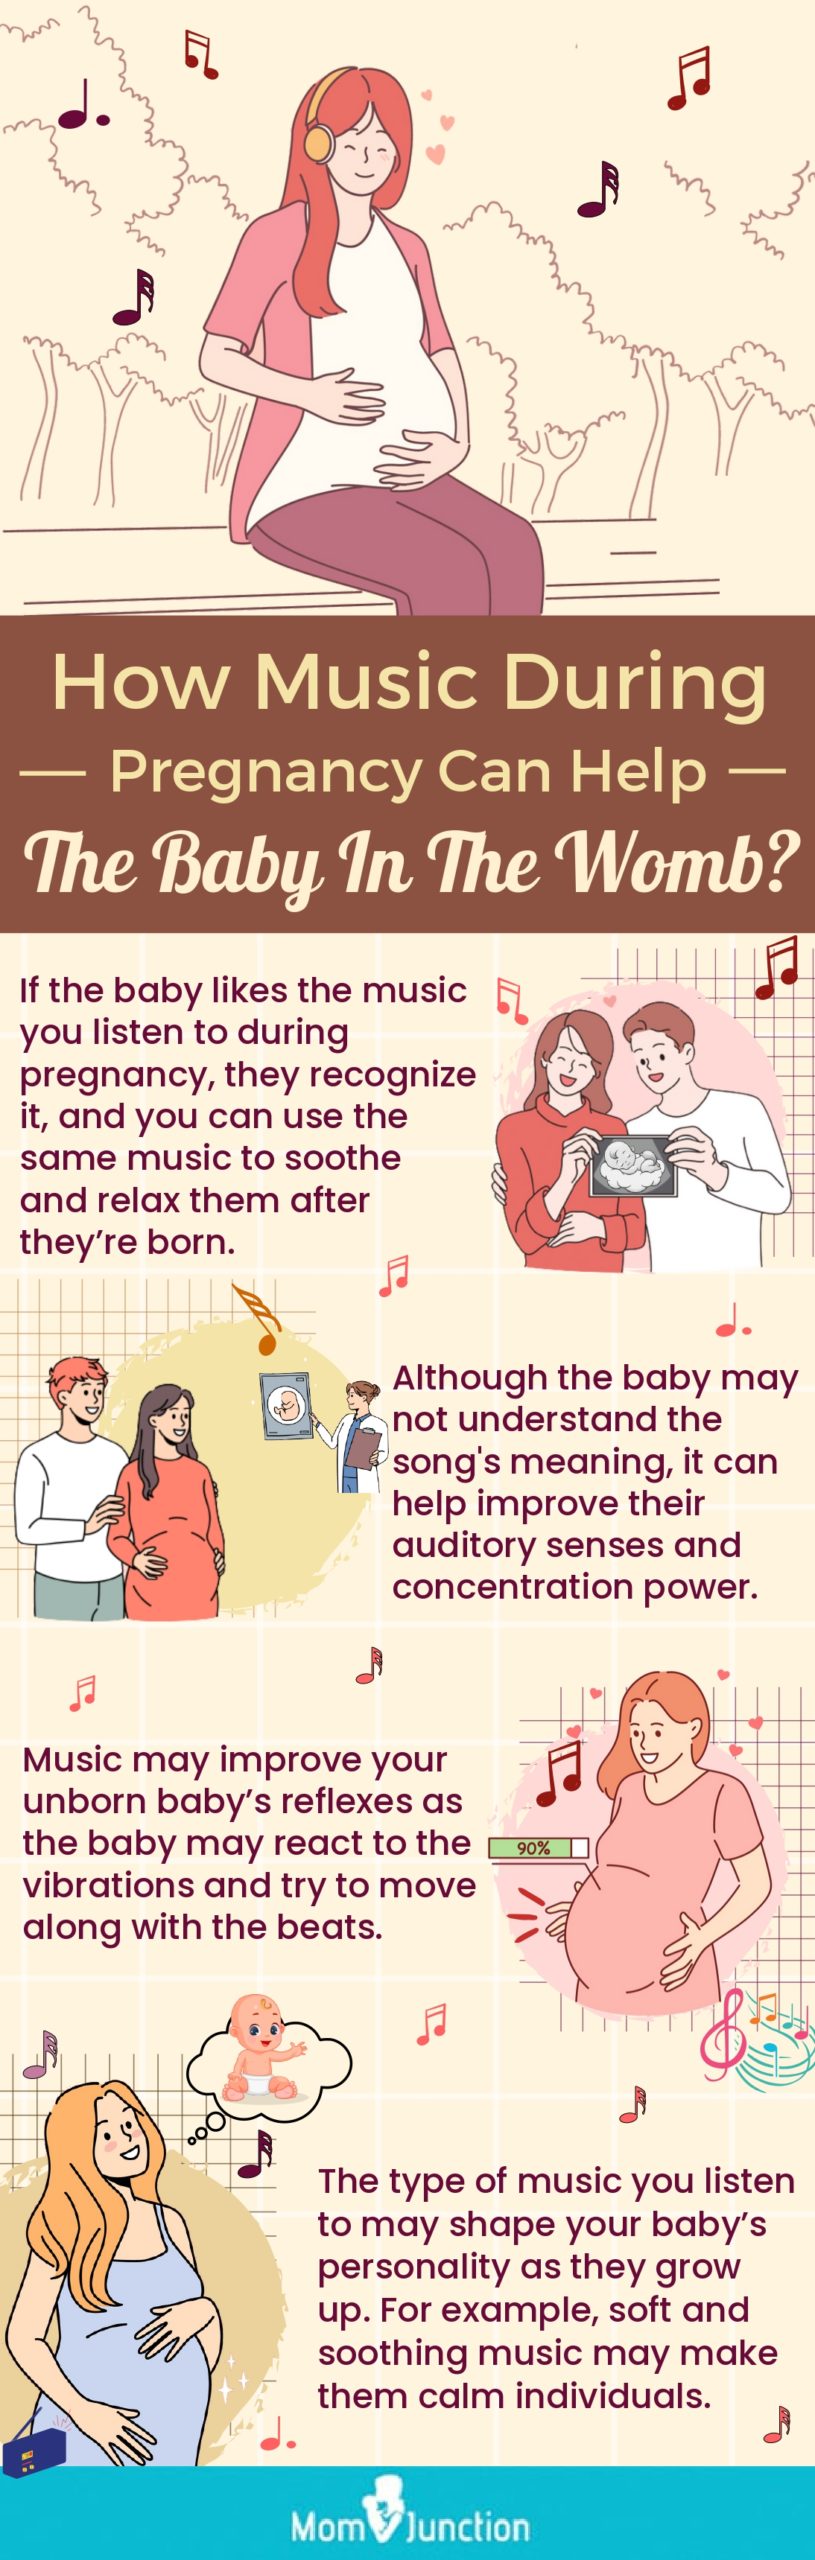 how music during pregnancy can help the baby in the womb (infographic)